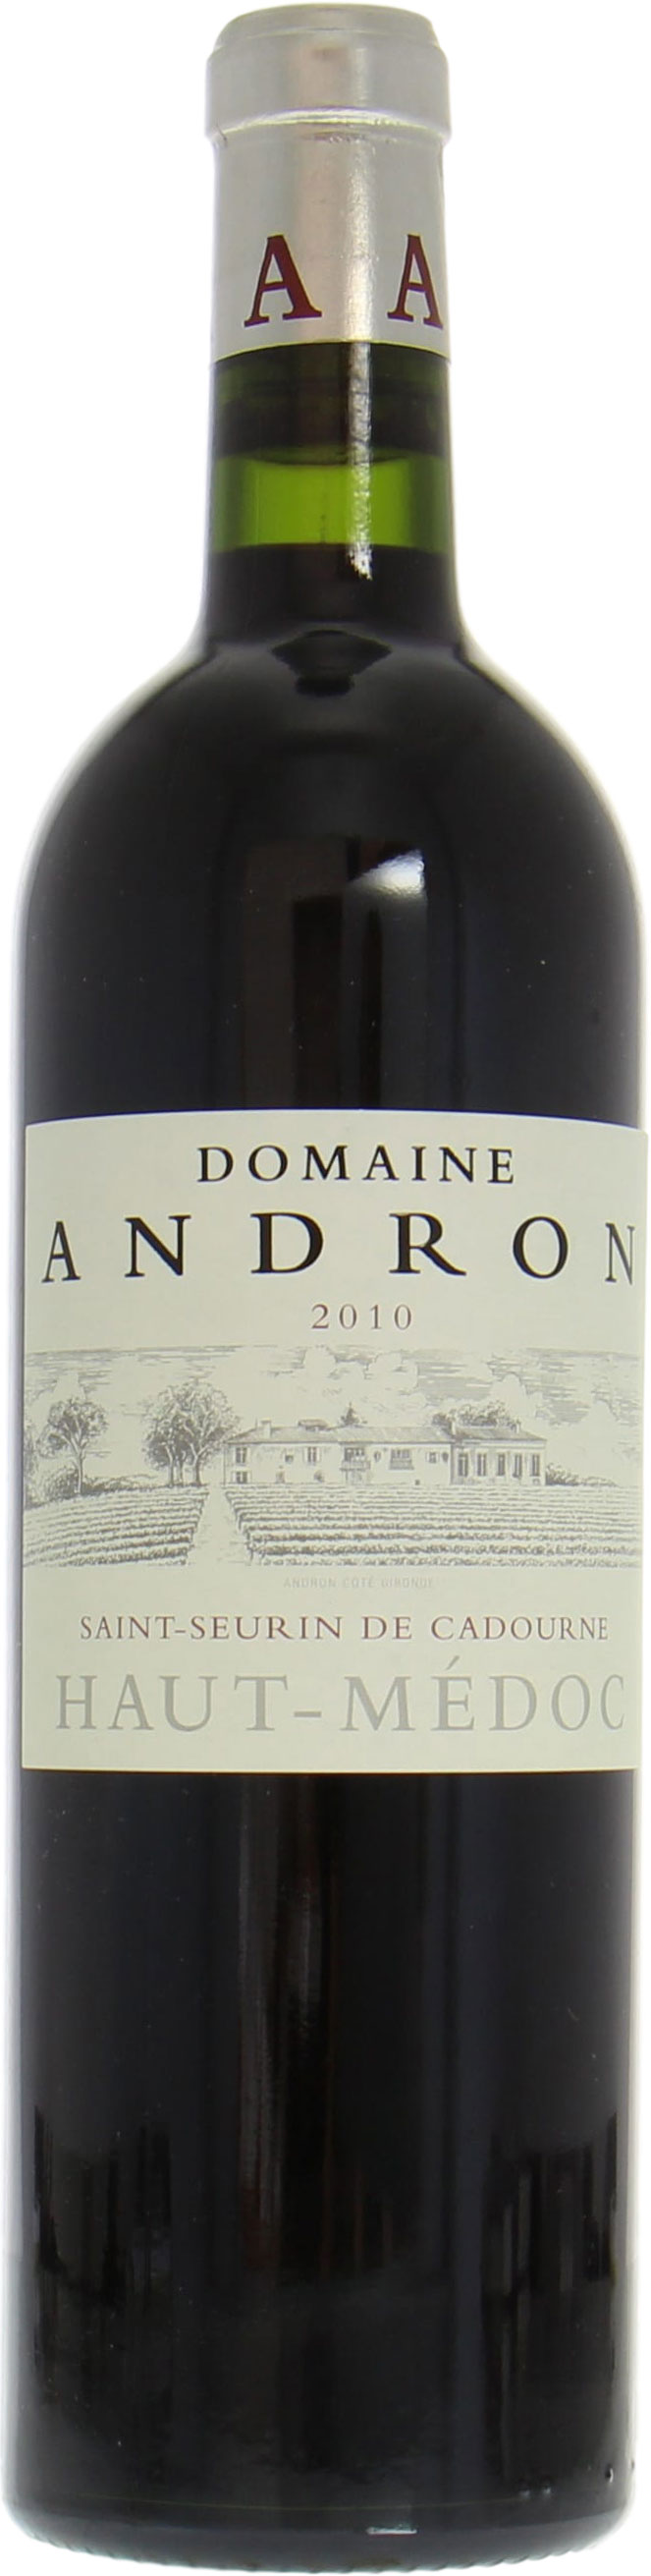 Domaine Andron - Domaine Andron 2010